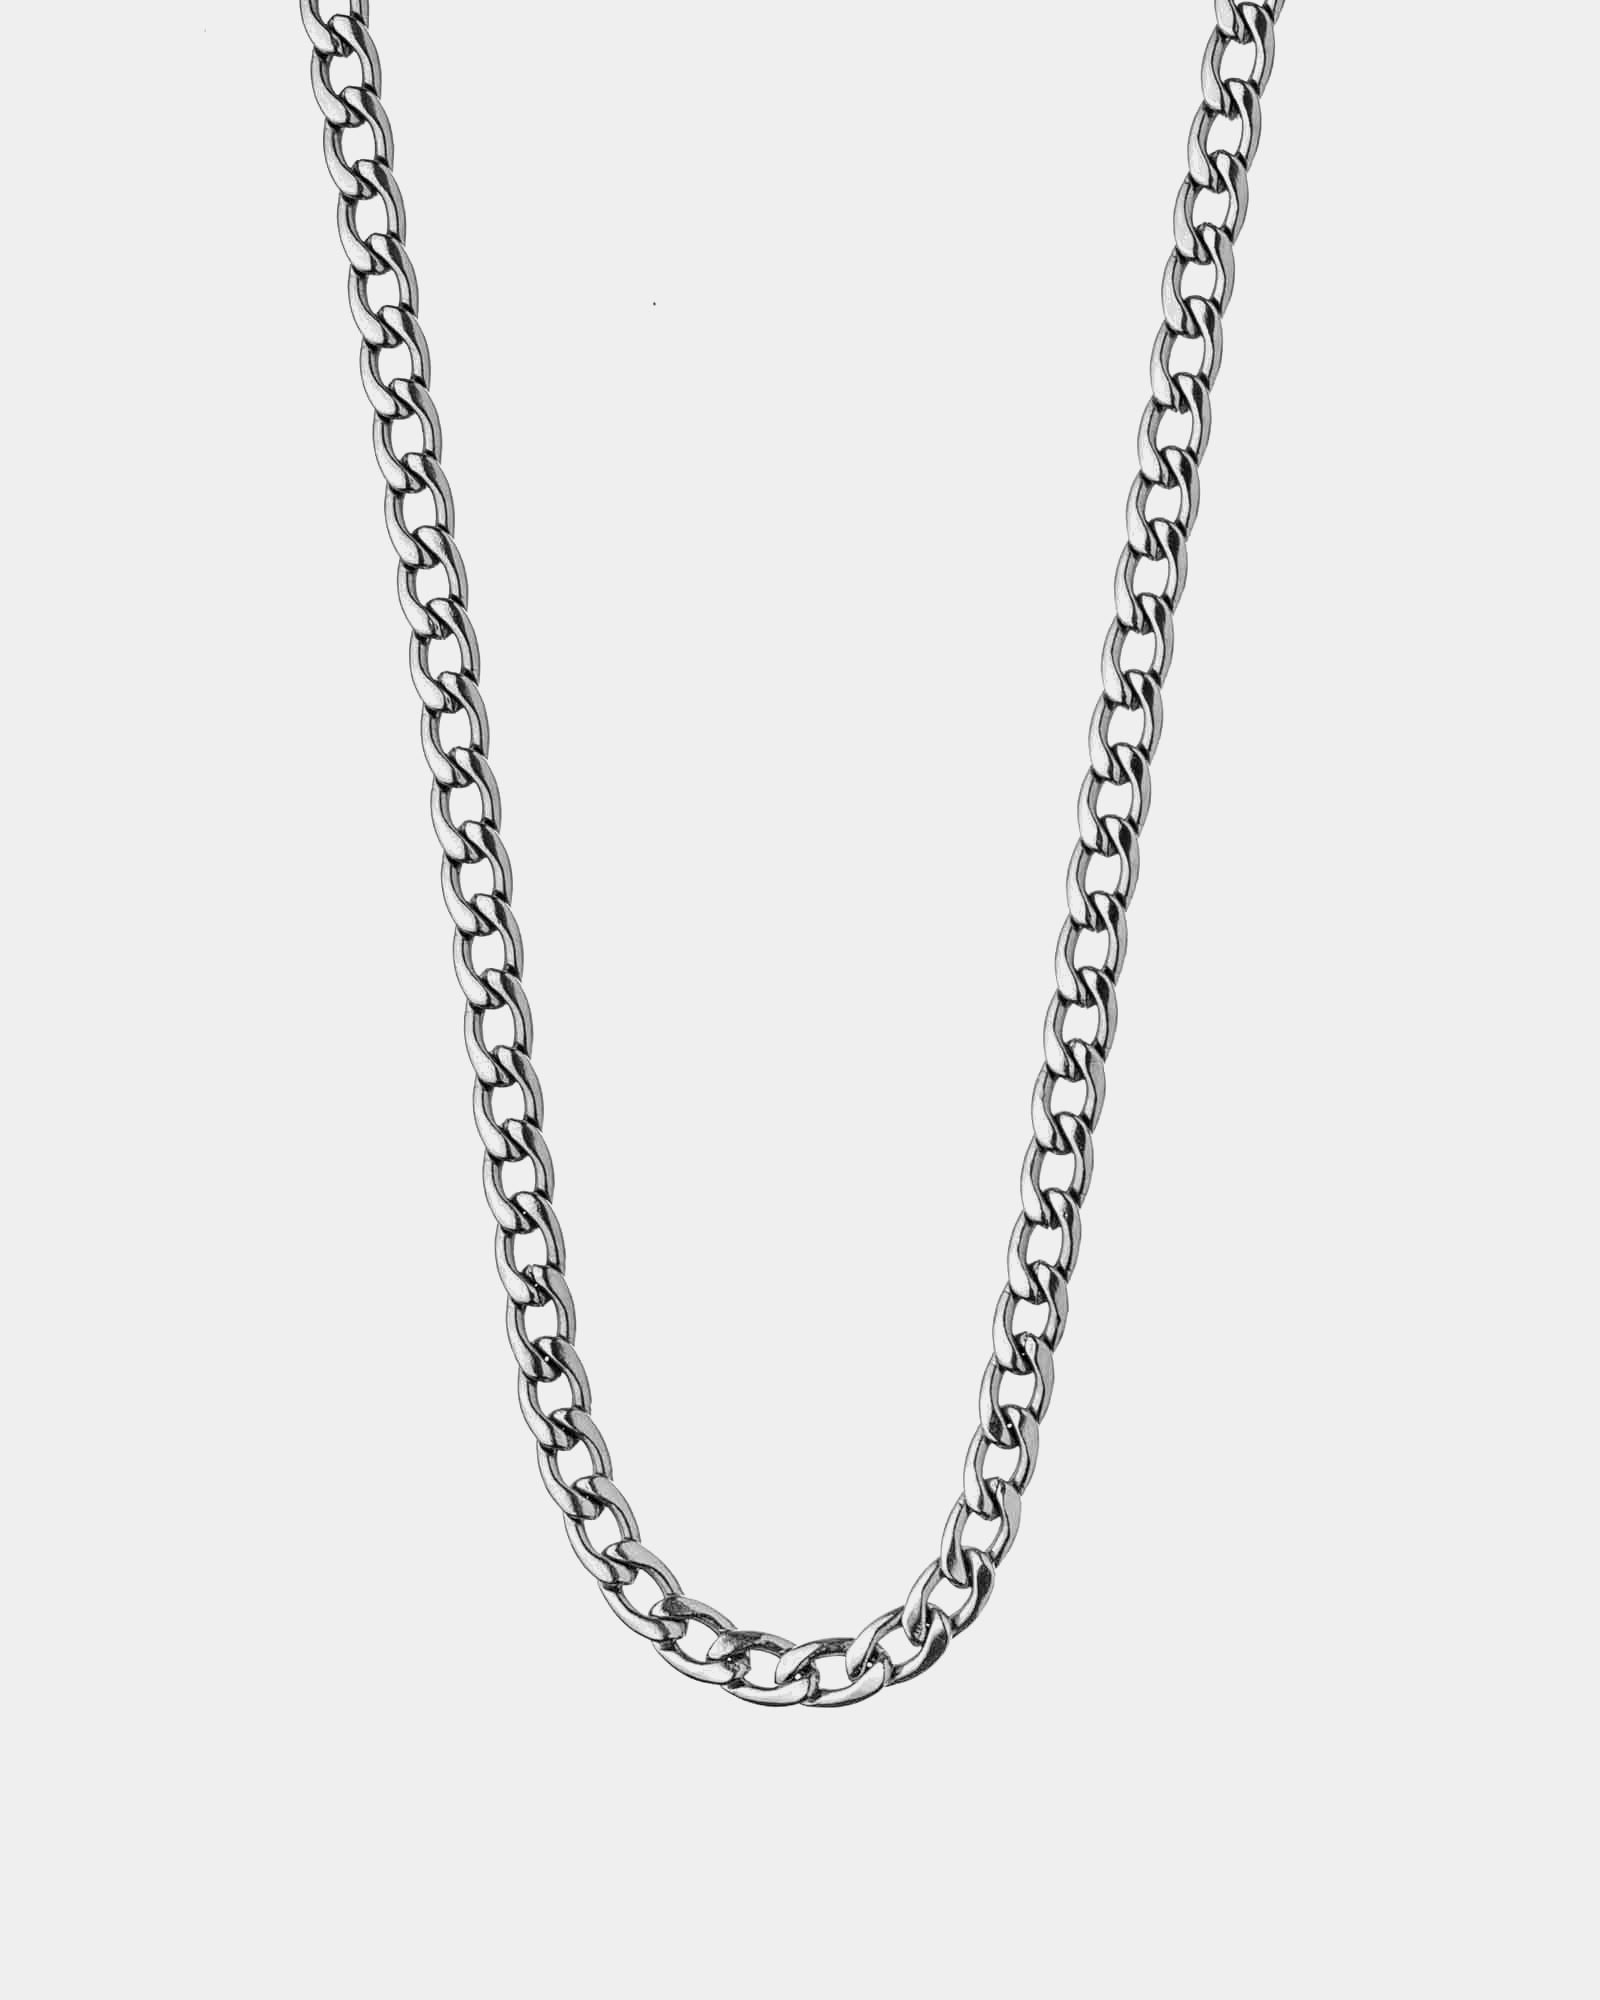 Vegas Necklace - Stainless Steel Necklace - Online Unissex Jewelry - Dicci